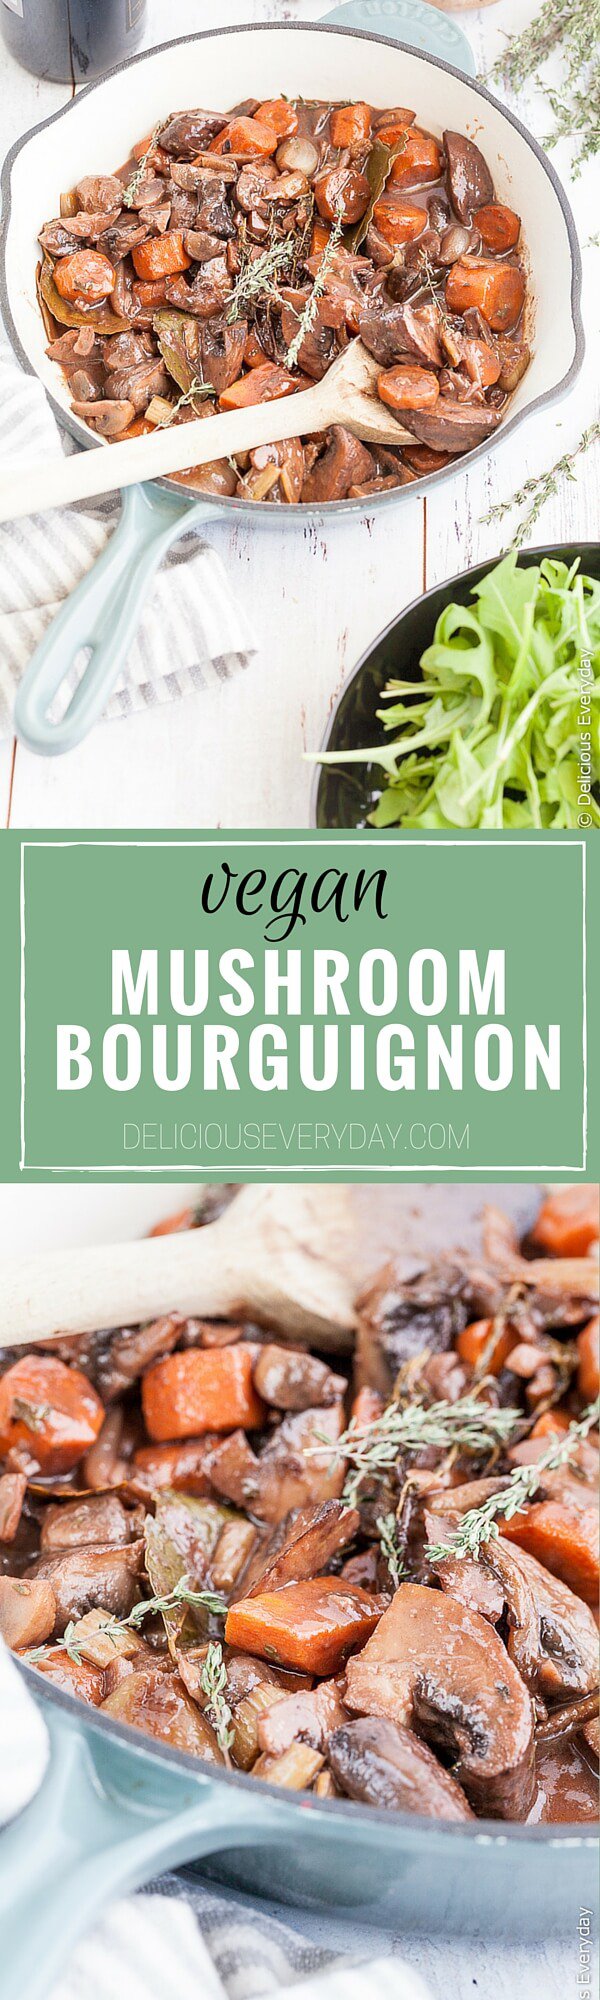 The classic beef bourguignon gets a vegan make over!